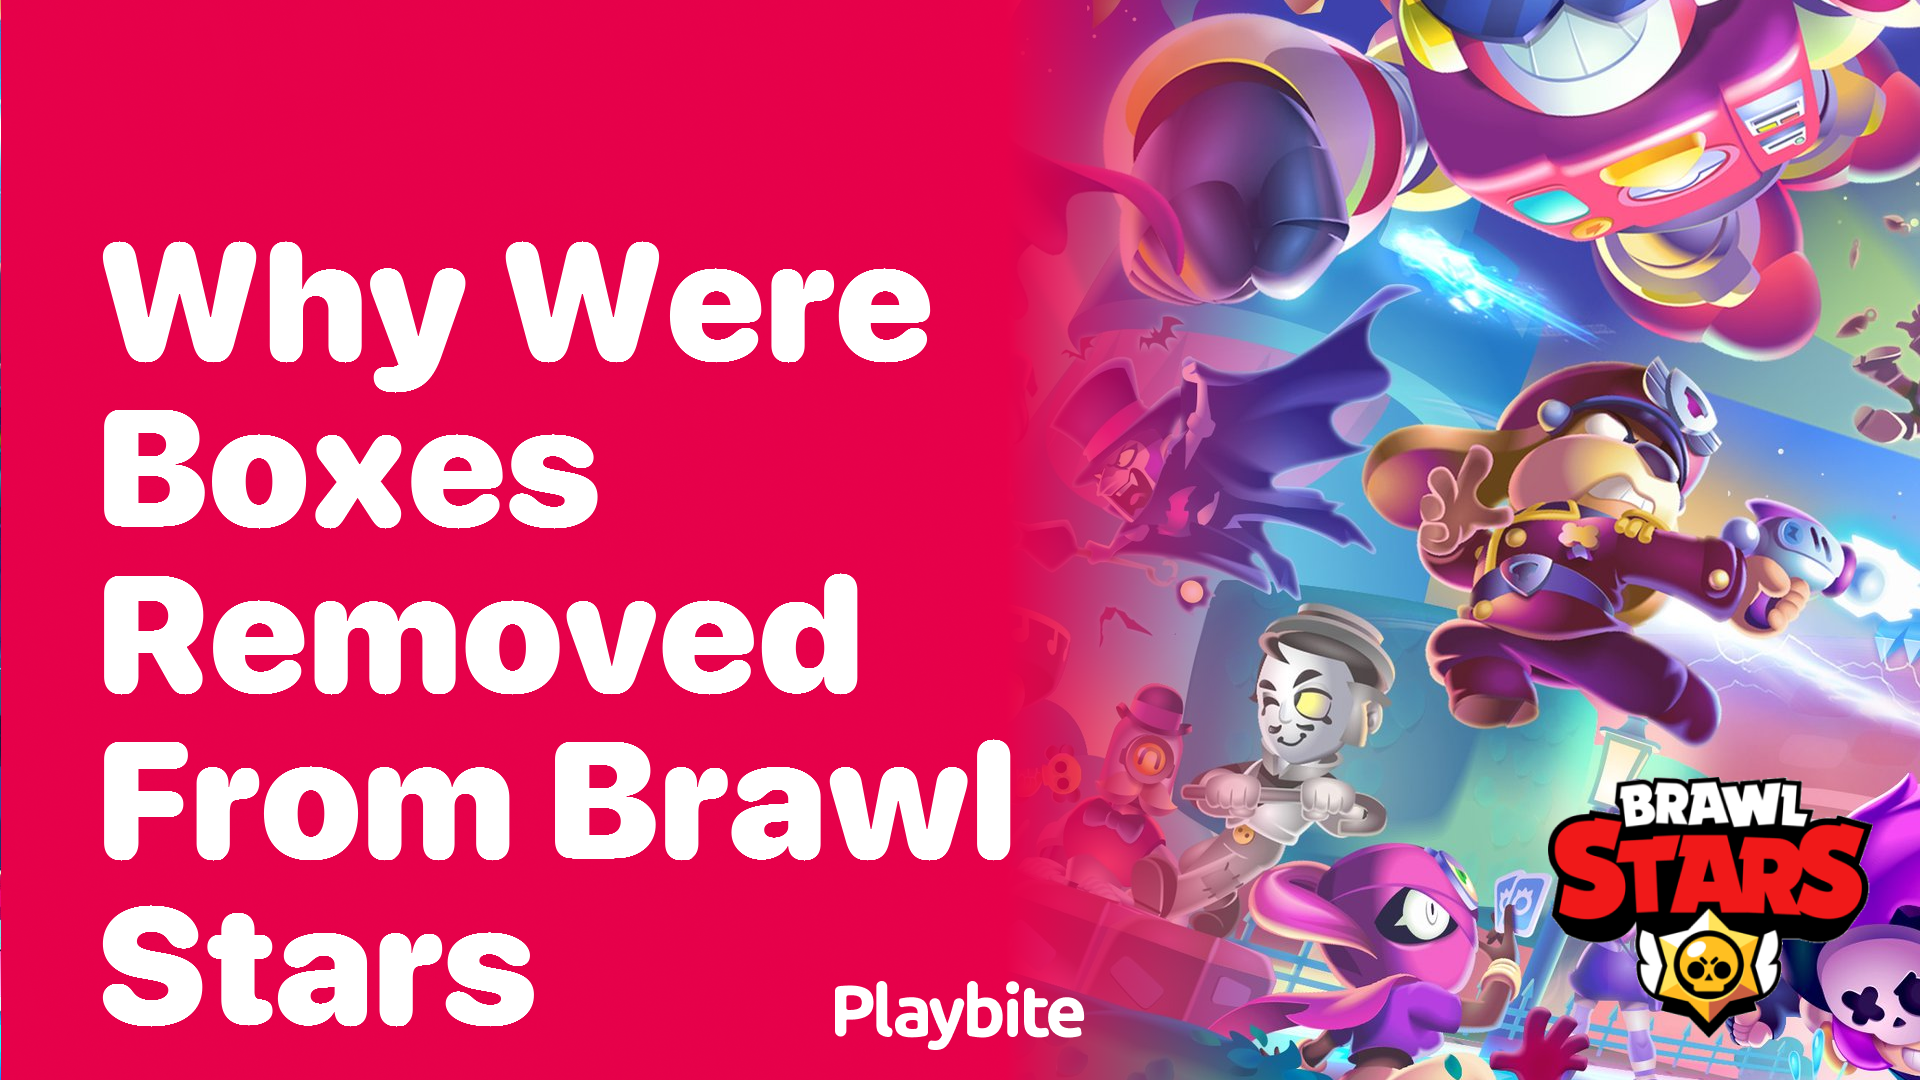 Why Were Boxes Removed from Brawl Stars?